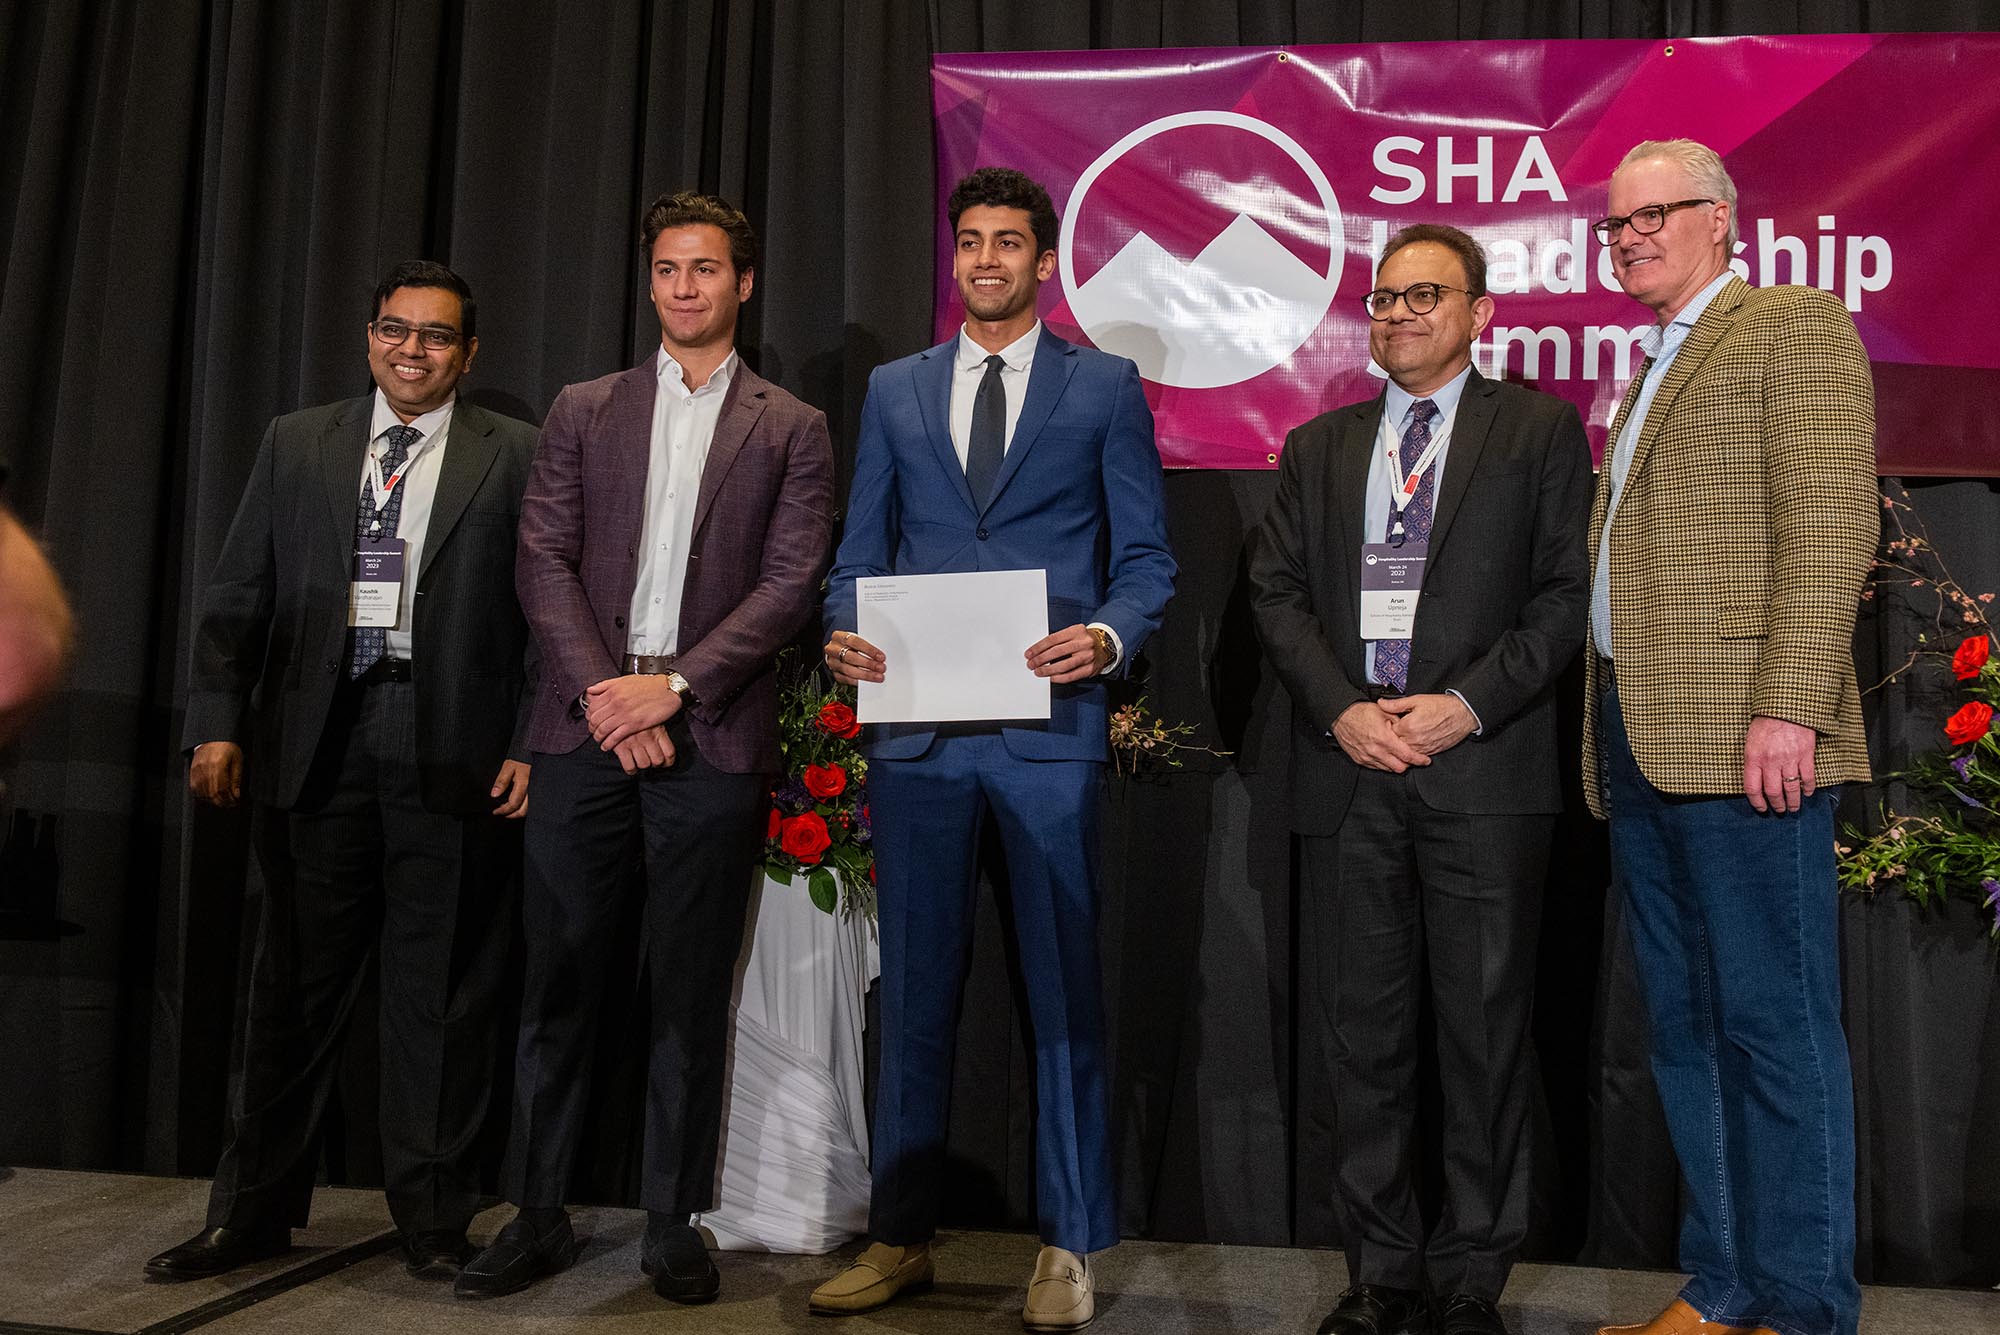 Photo: Five men stand on a stage to celebrate the winner of a compeition. From left, a West Asian man wearing a black suit, a white man in a maroon blazer and black pants, a West Asian man wearing a blue suit with a black tie, an older West Asian man wearing a black suit with a purple tie, and a white man wearing a plaid blazer with tailored jeans and glasses. They are all smiling for the photo, looking to the left at another camera.